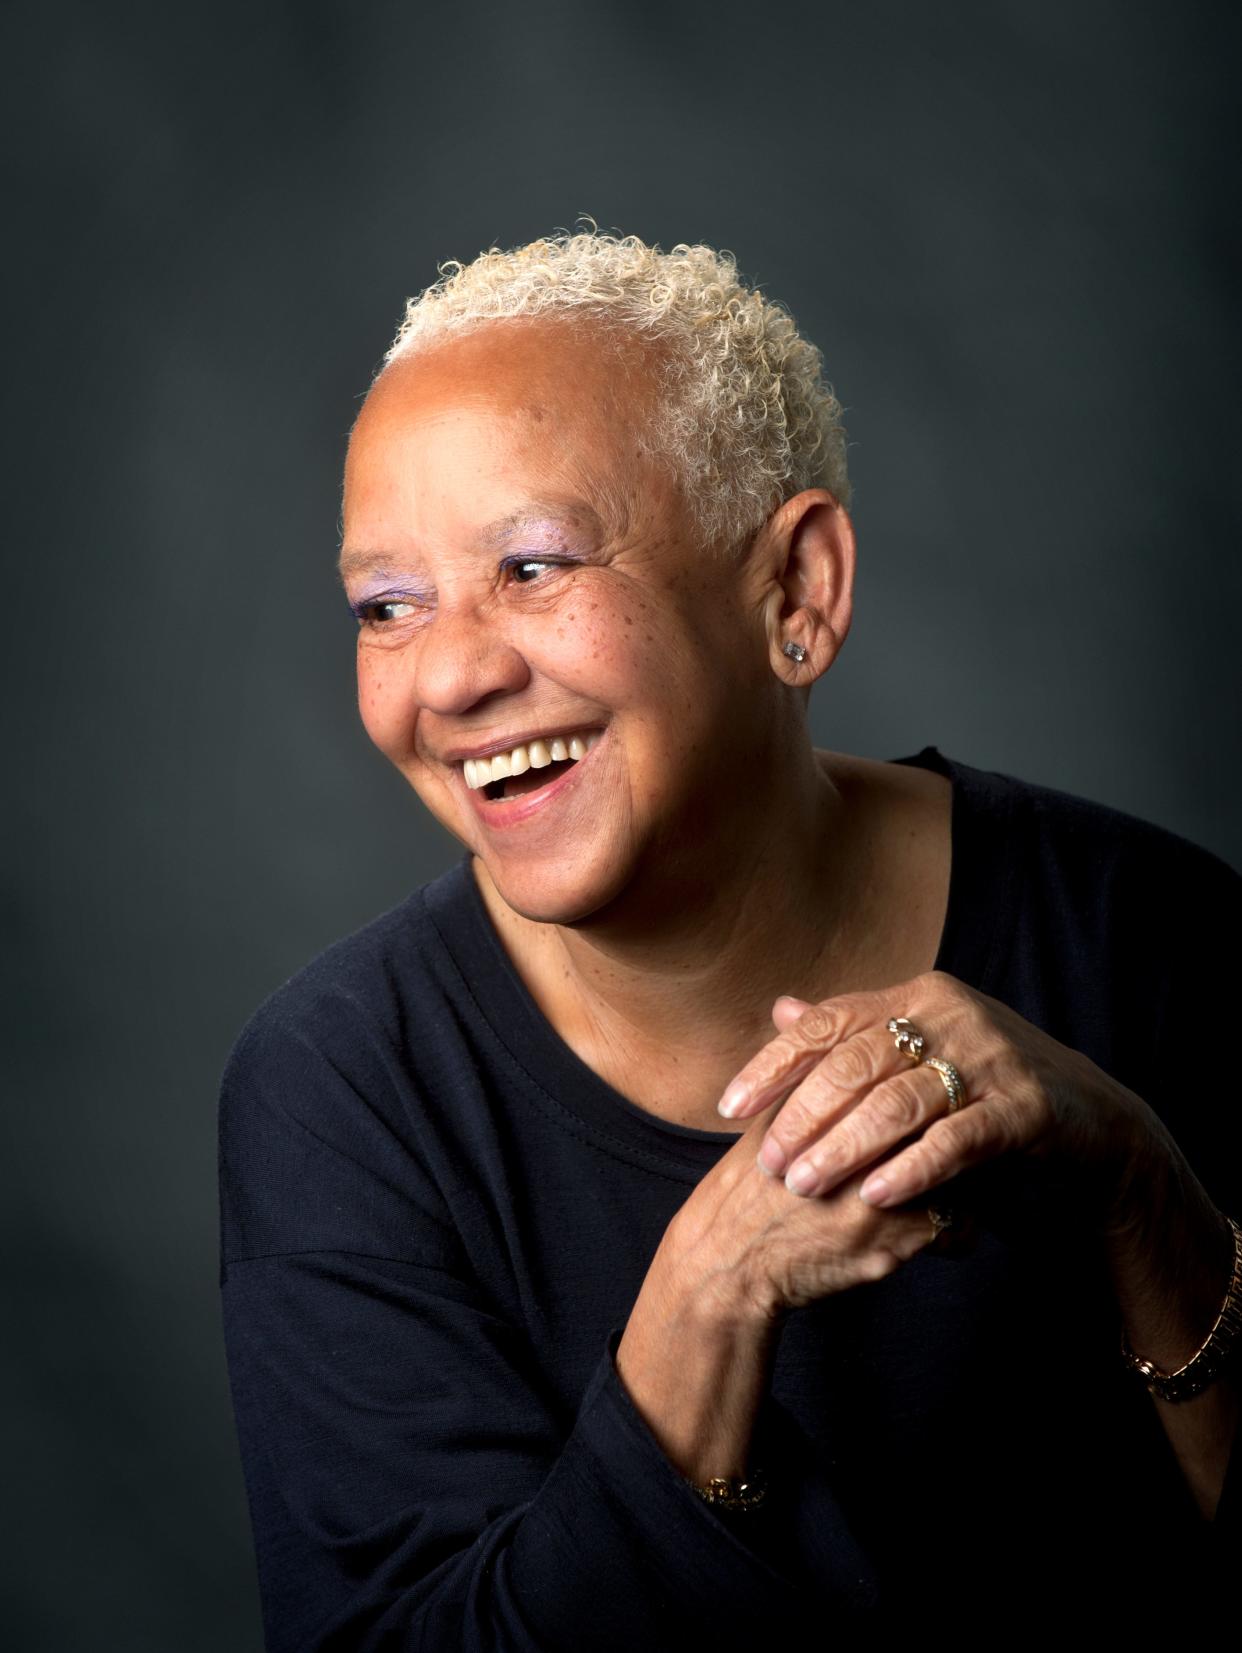 African American poet Dr. Nikki Giovanni comes to Mary Baldwin University for Harlem Renaissance Rent Party.